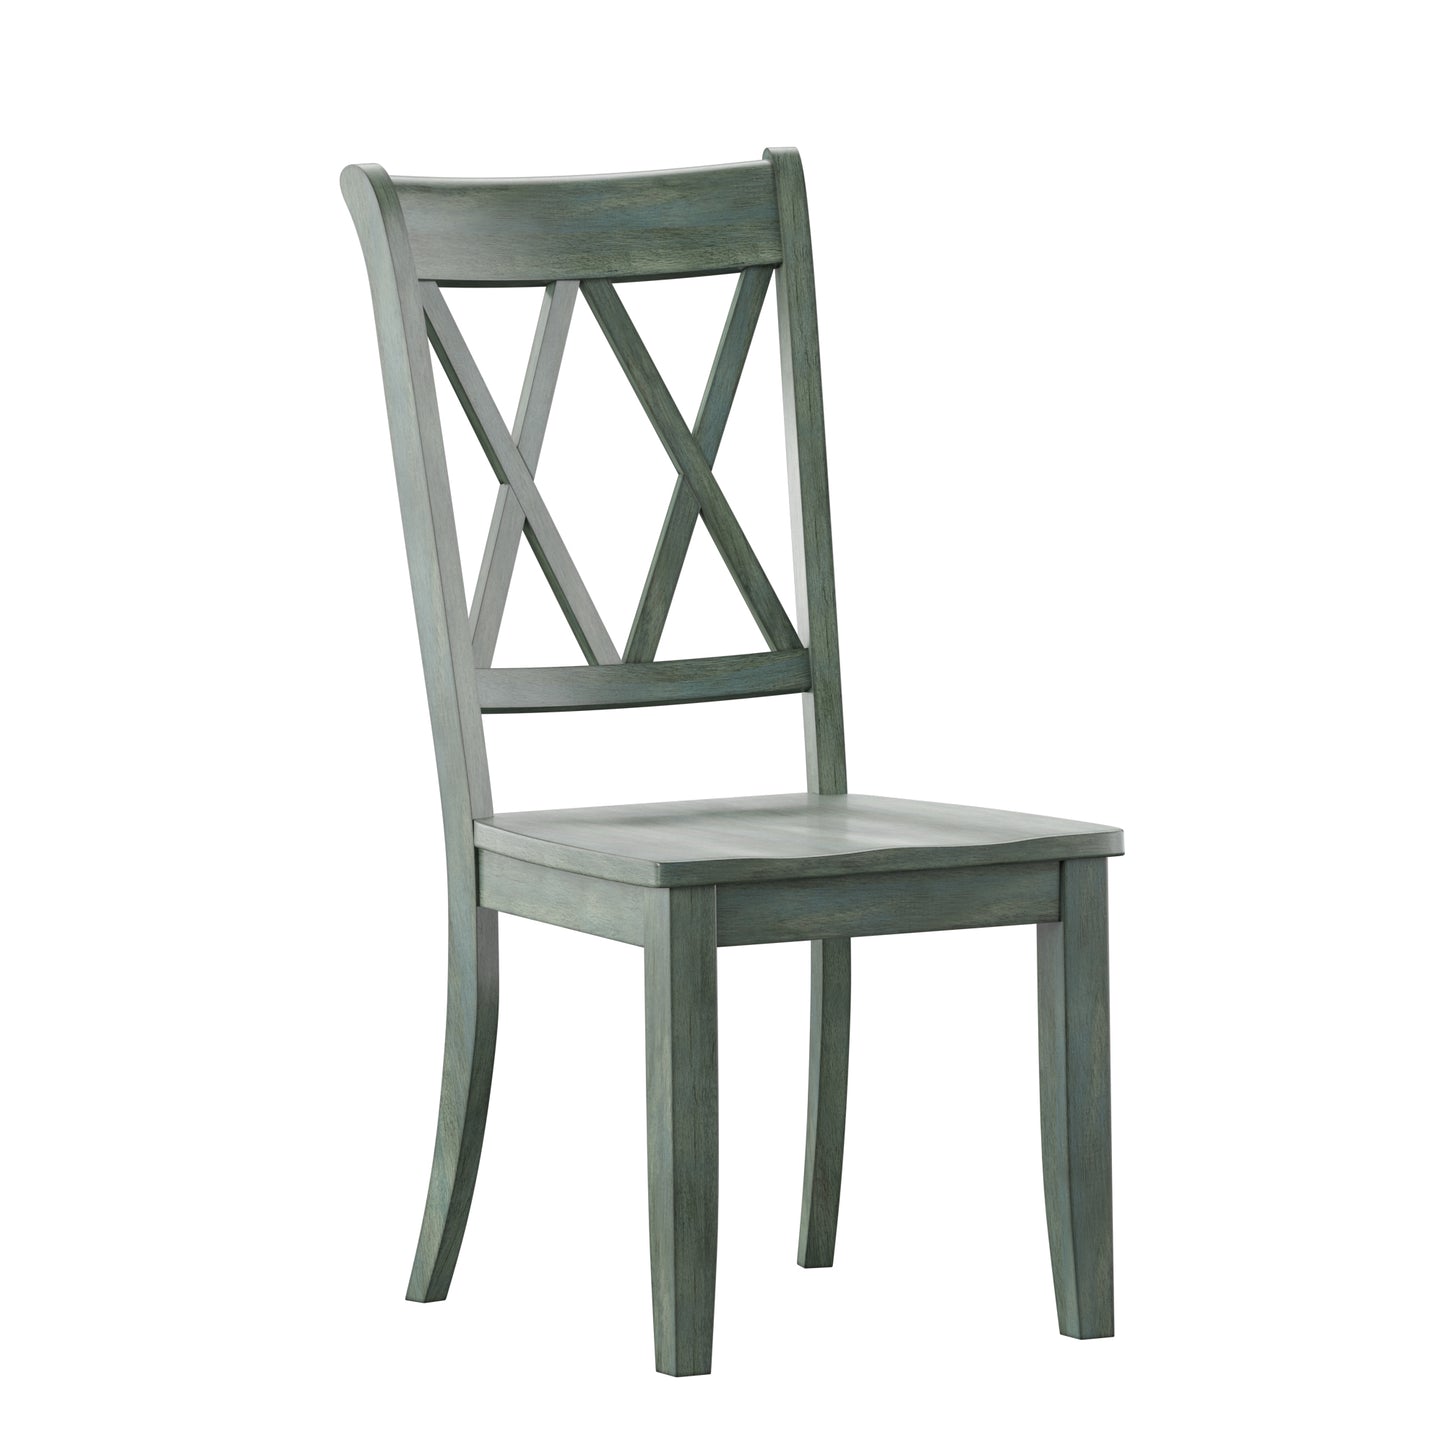 Double X Back Wood Dining Chairs (Set of 2) - Antique Sage Green Finish